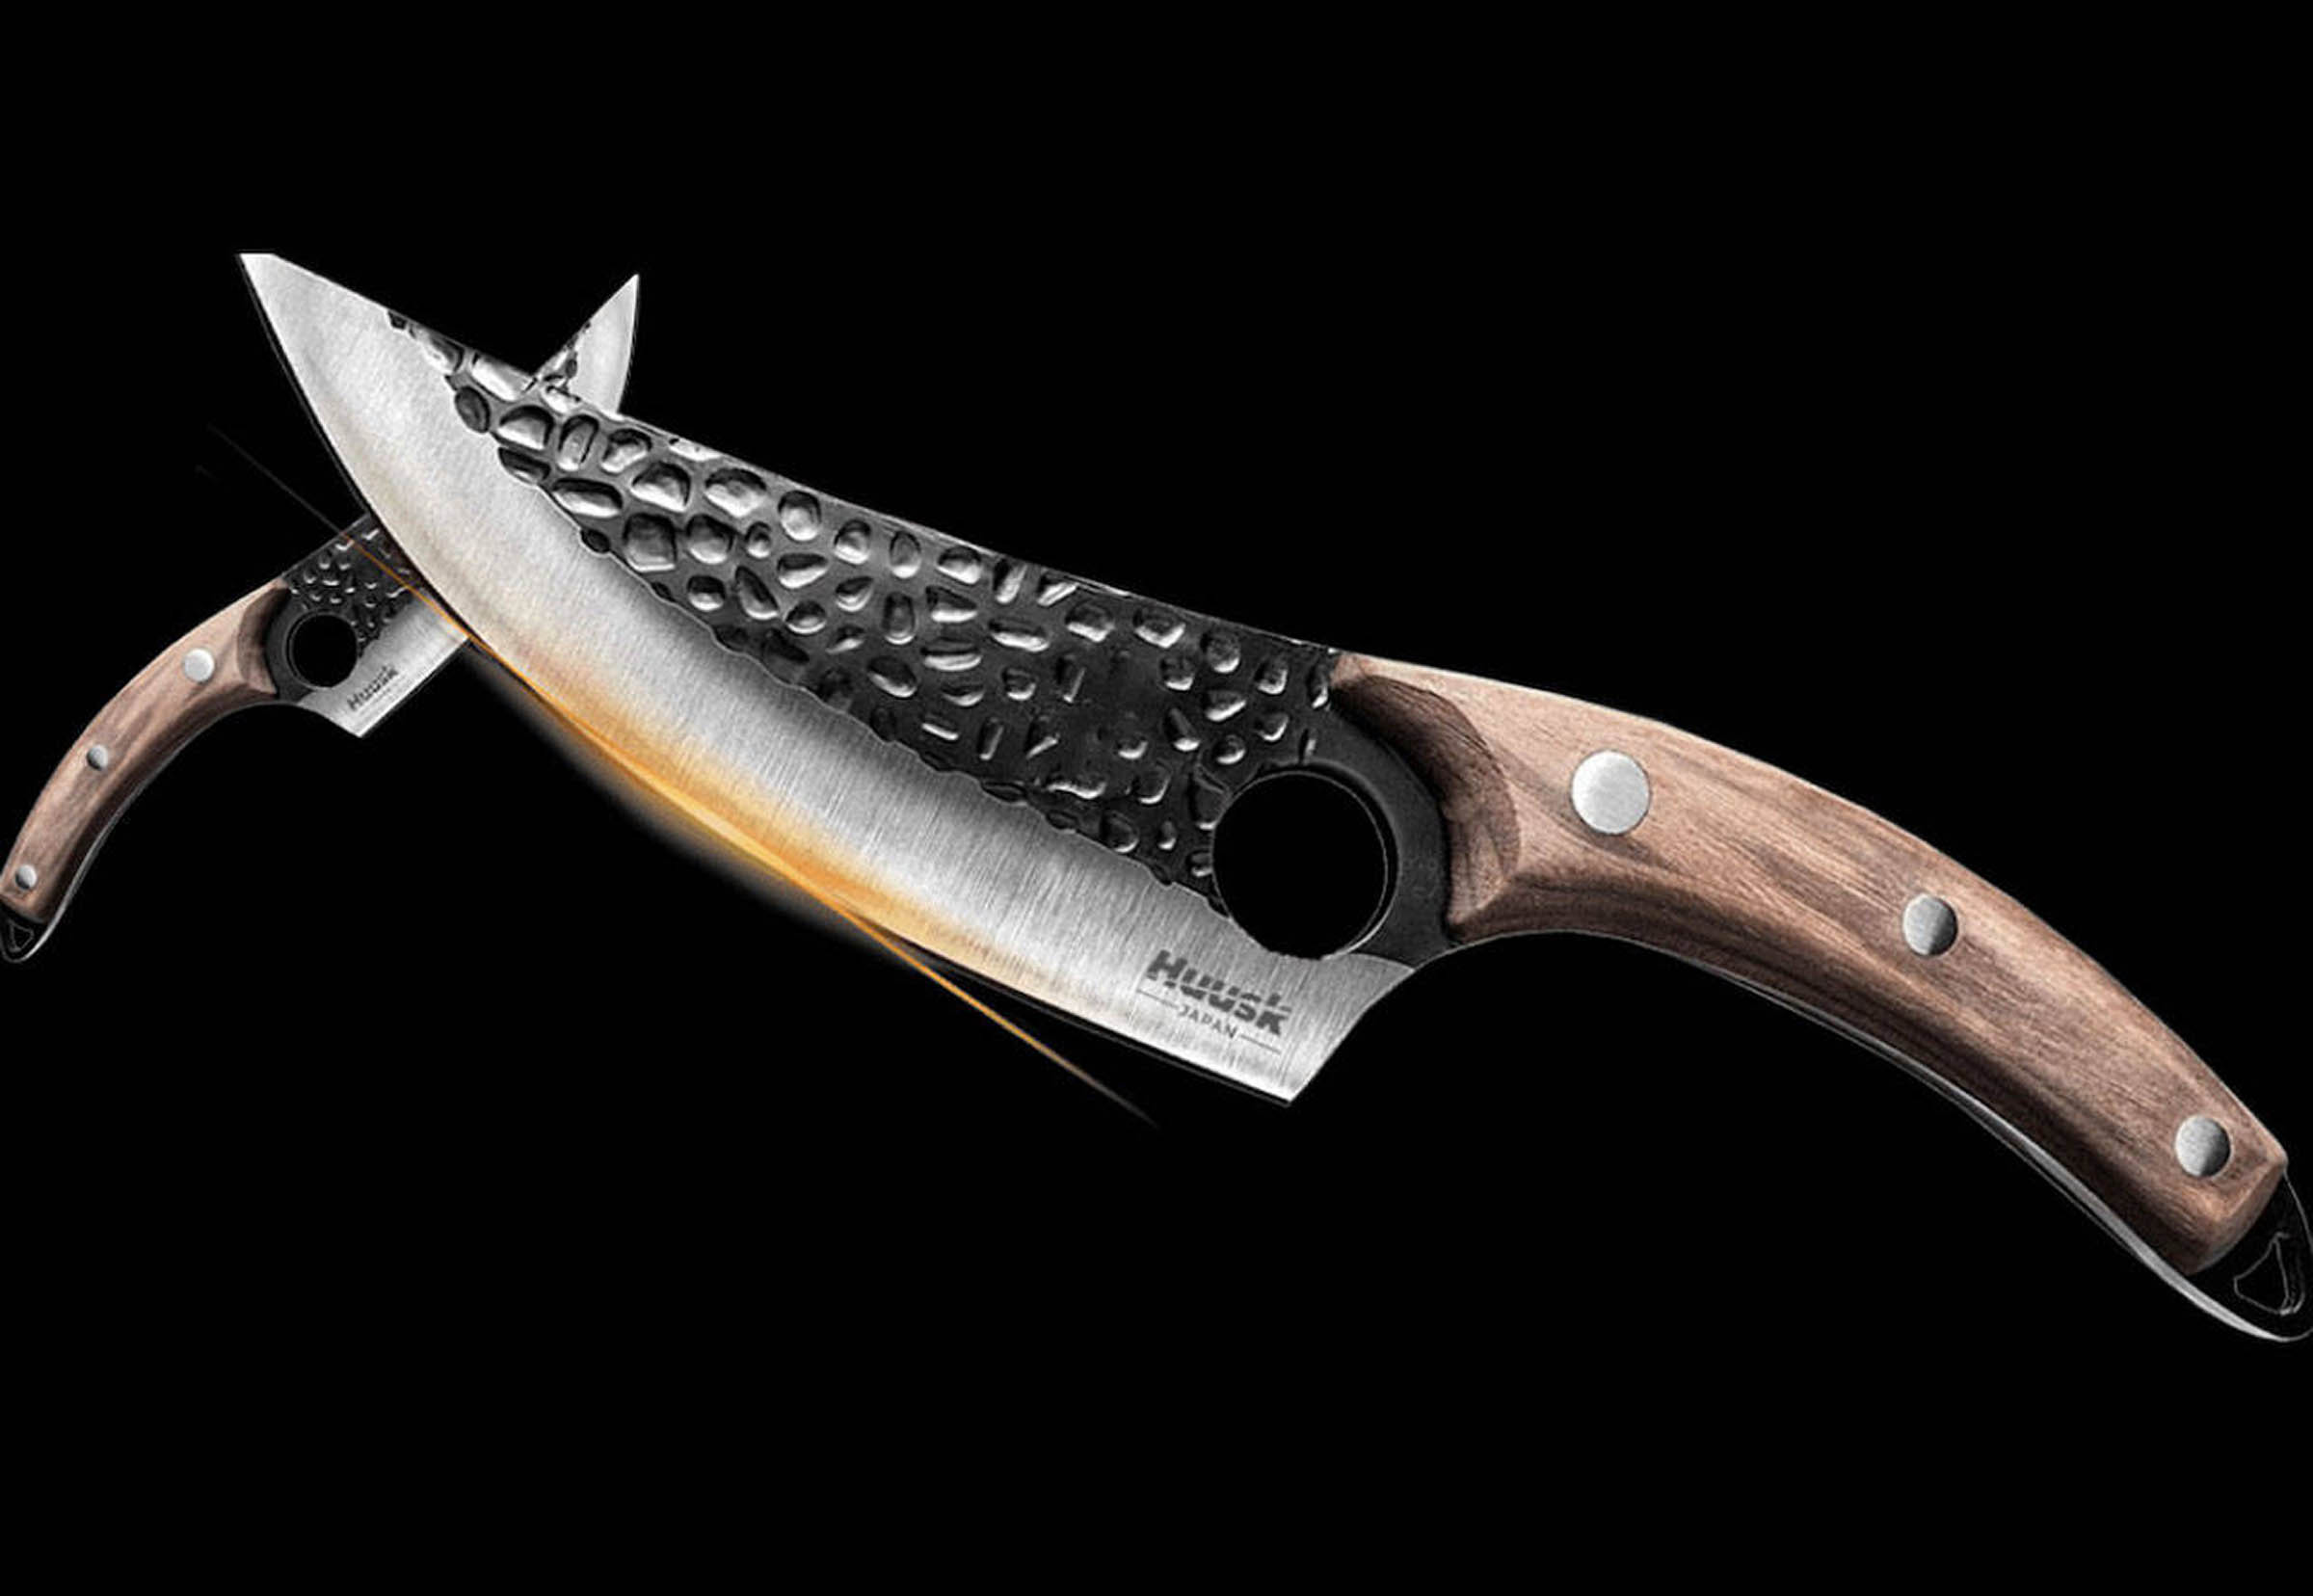 Are Huusk Knives really all they are hyped up to be? Dive into the details and decide for yourself if these kitchen knives are legit!